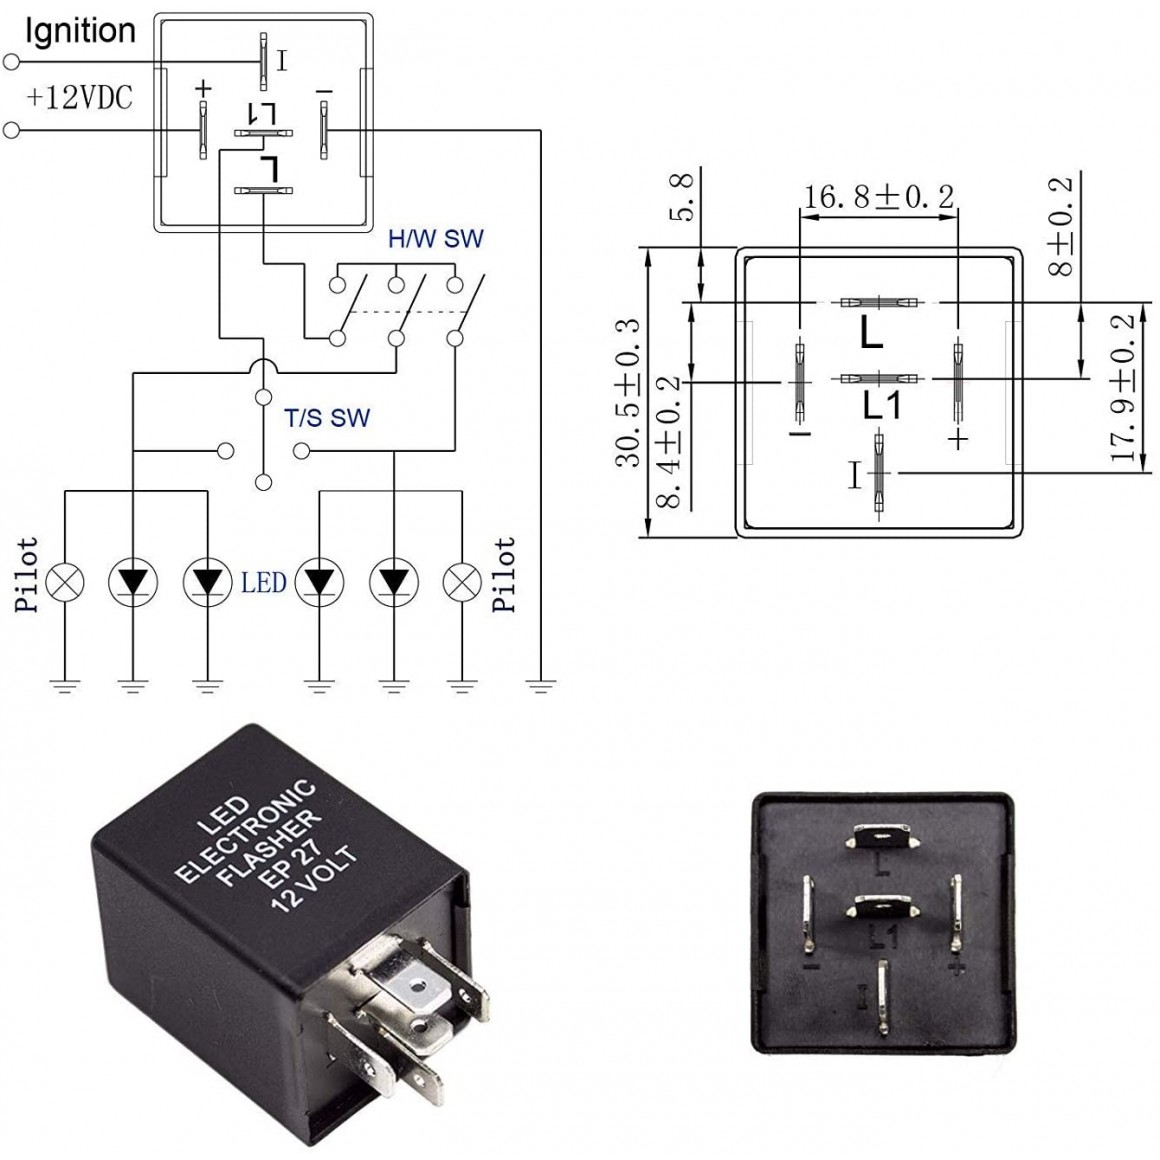 T = 3 S NOS data-mtsrclang=en-US href=# onclick=return false; 							show original title 12 V AC/DC t = 3 s NOS- Details about   Giant rs-brs2 FLASHER RELAY RELAY Flashing Relay 12 V AC/DC 